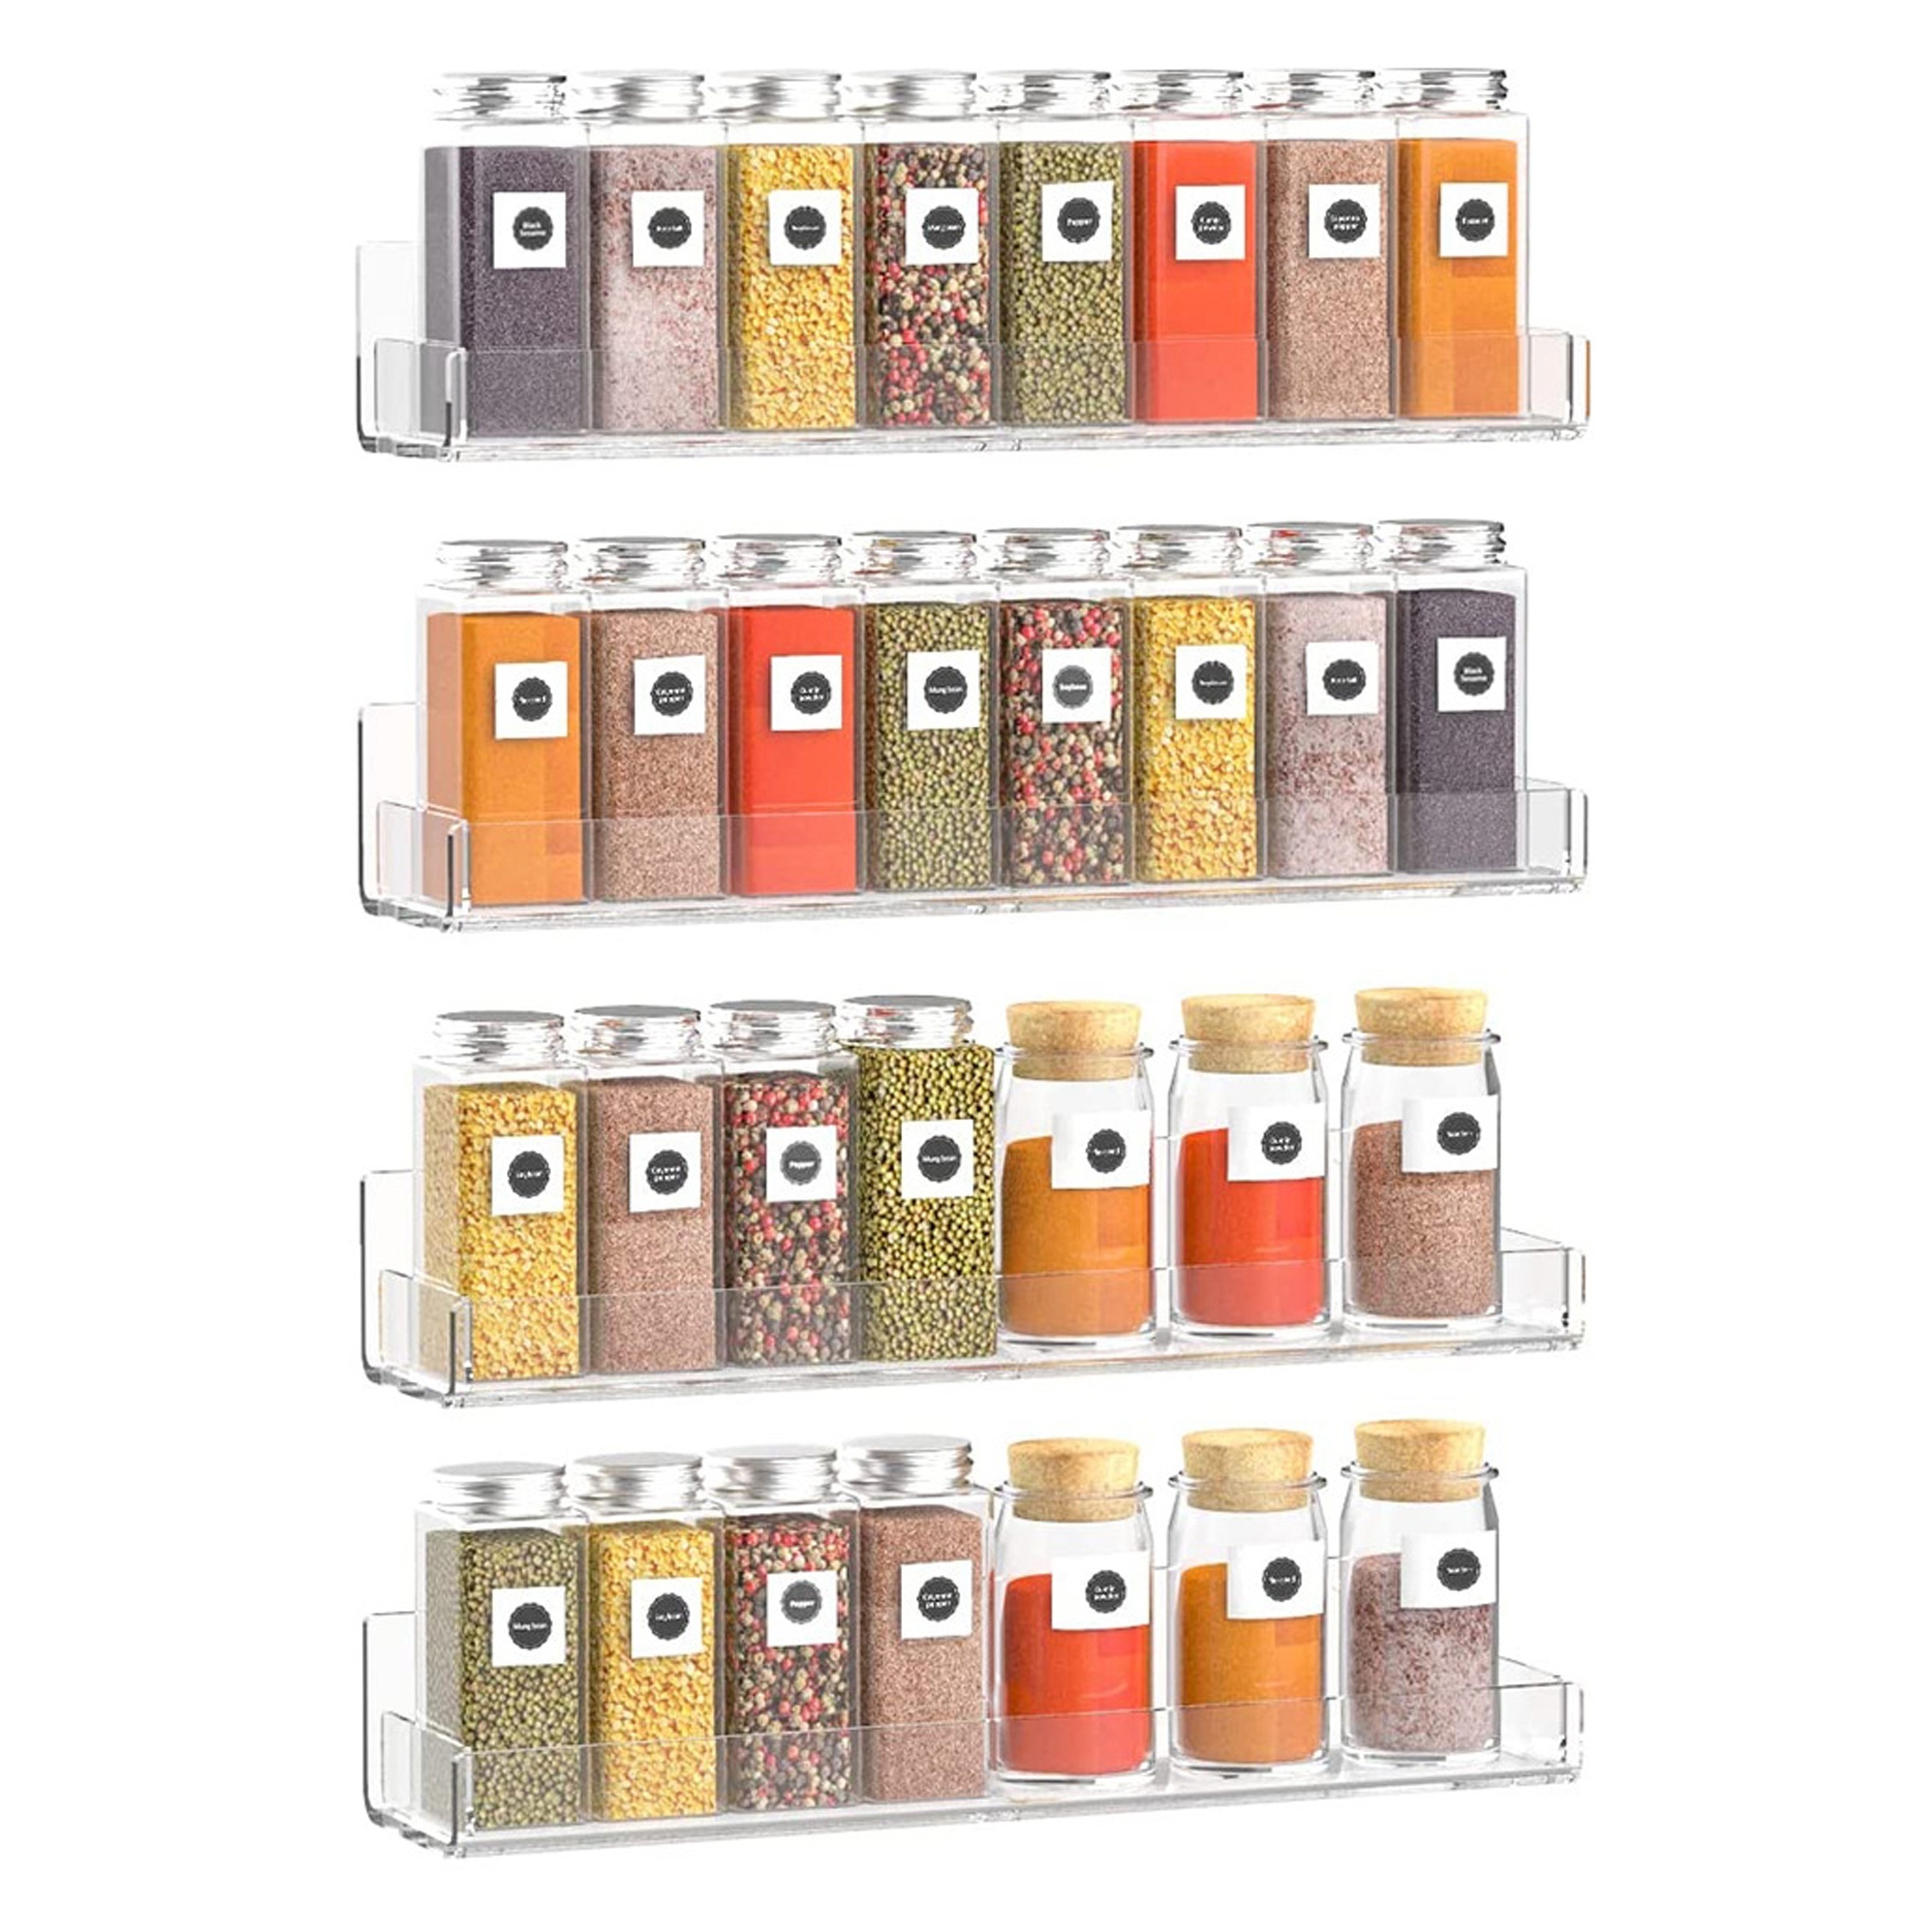 Adhesive Spice Rack Organizer Wall Mount, Clear Acrylic Shelves [3